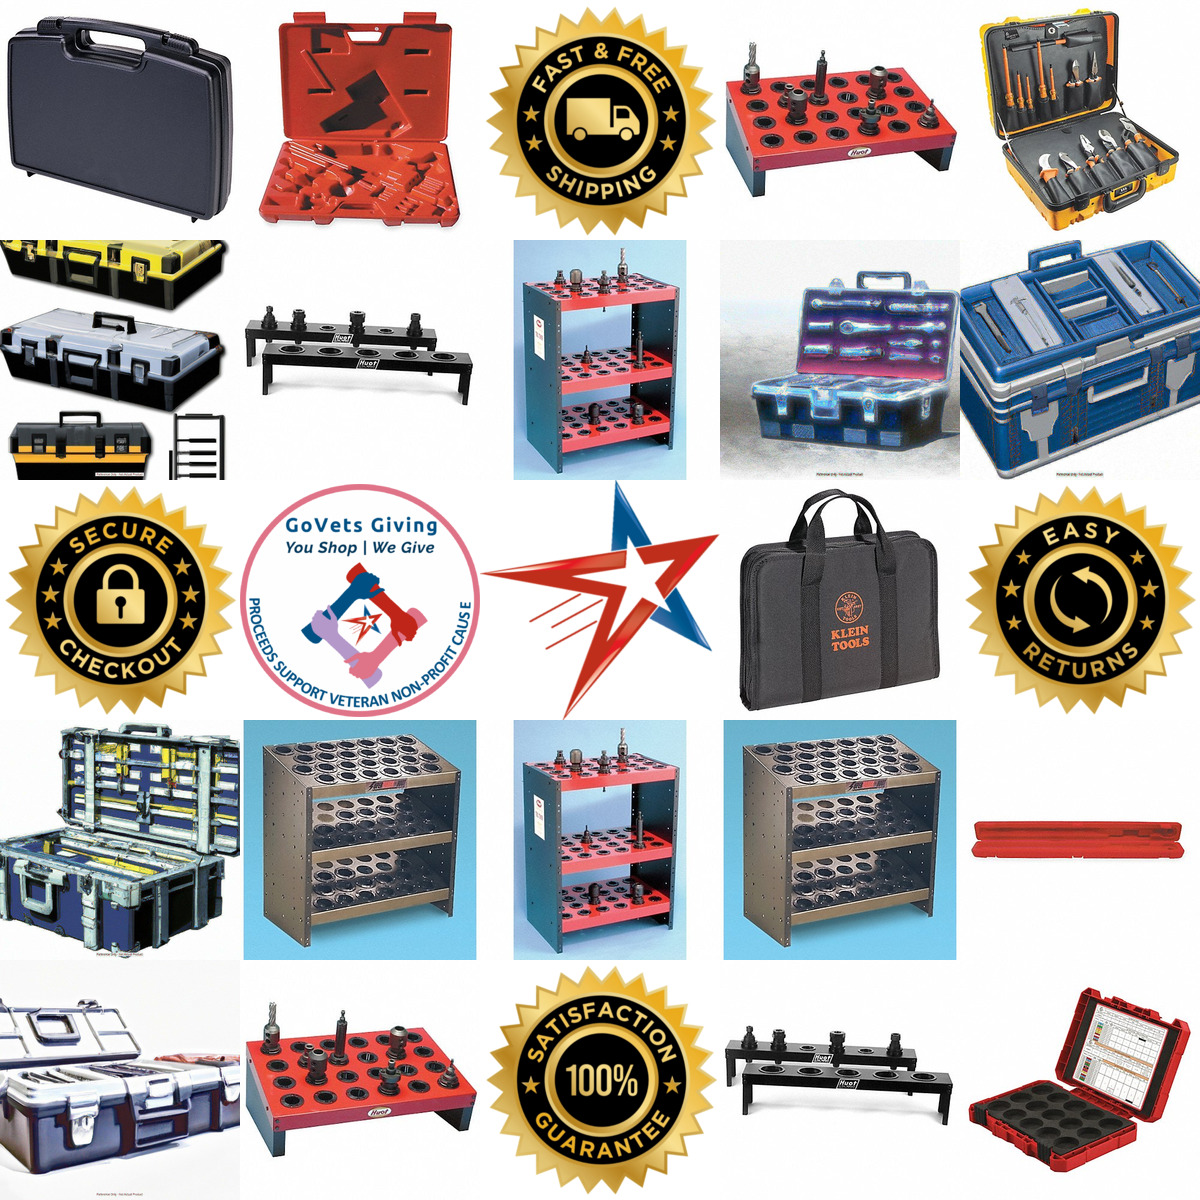 A selection of Replacement Tool Cases products on GoVets